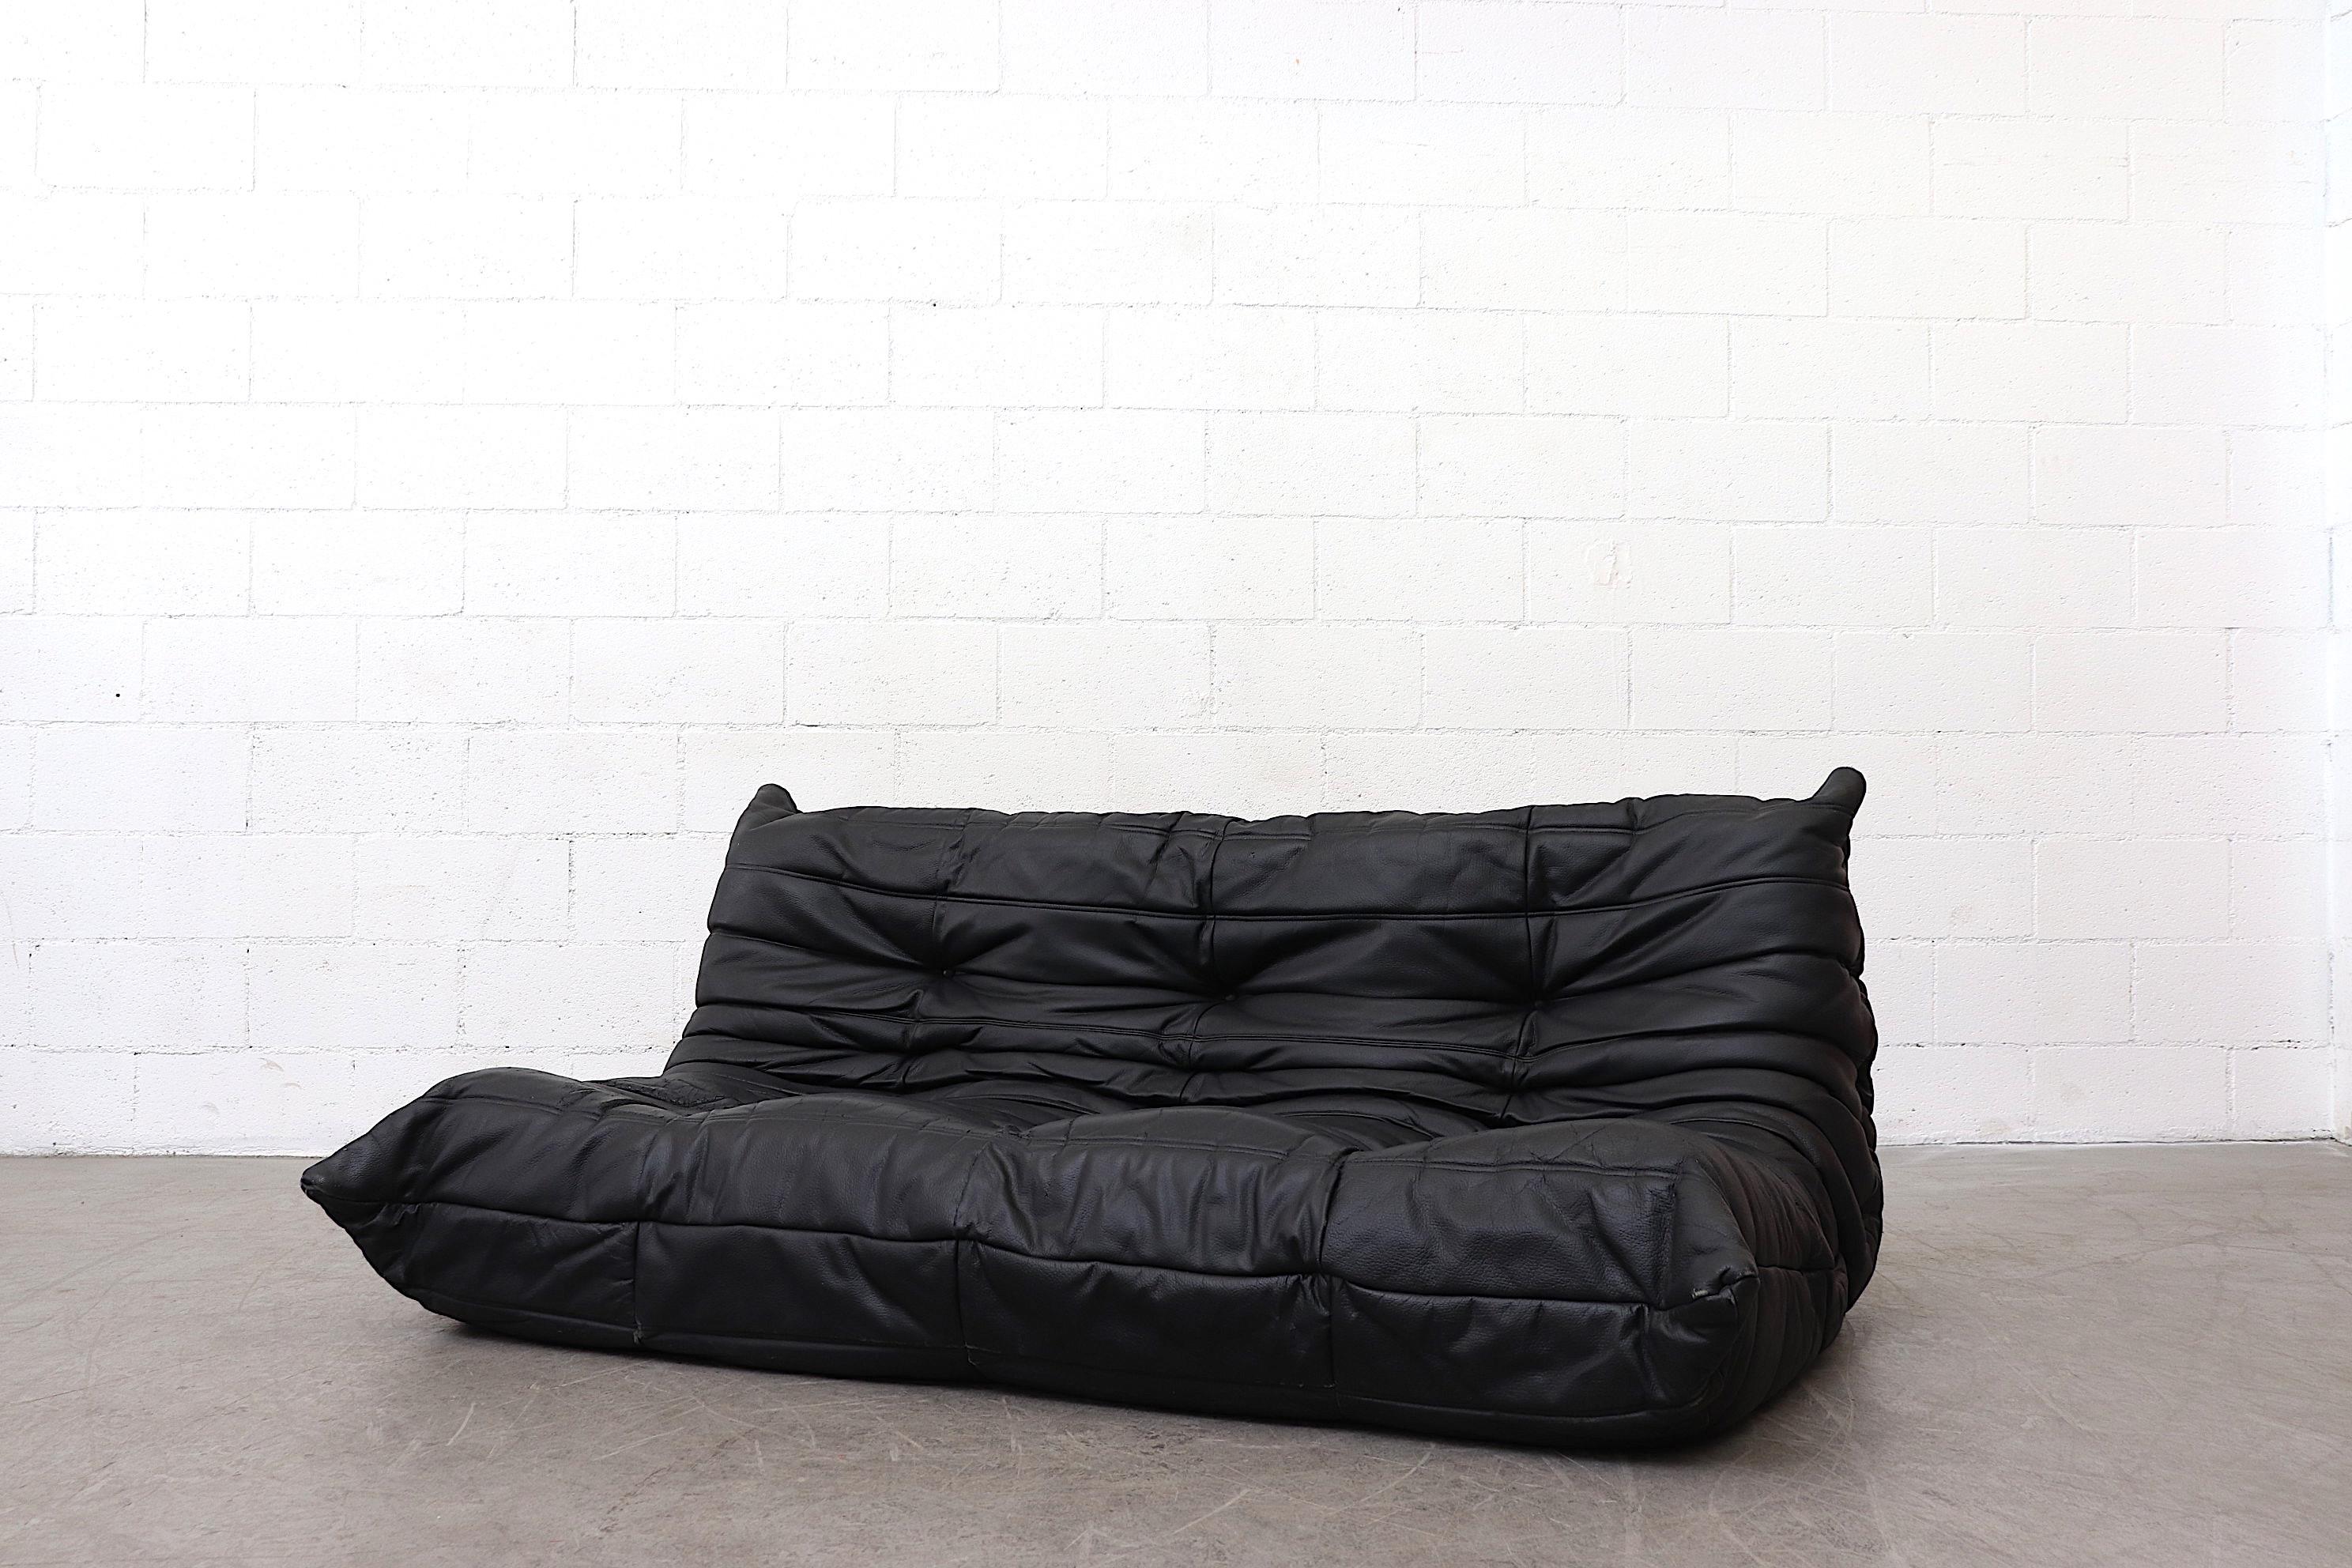 Ligne Roset black leather 'TOGO' sofa. Heavy patina. In very original condition with visible signs of wear, including a small rip to leather on top of backrest of sofa 'A' and visible cracking. The other sofa ('B') is SOLD. Detail photos shown here